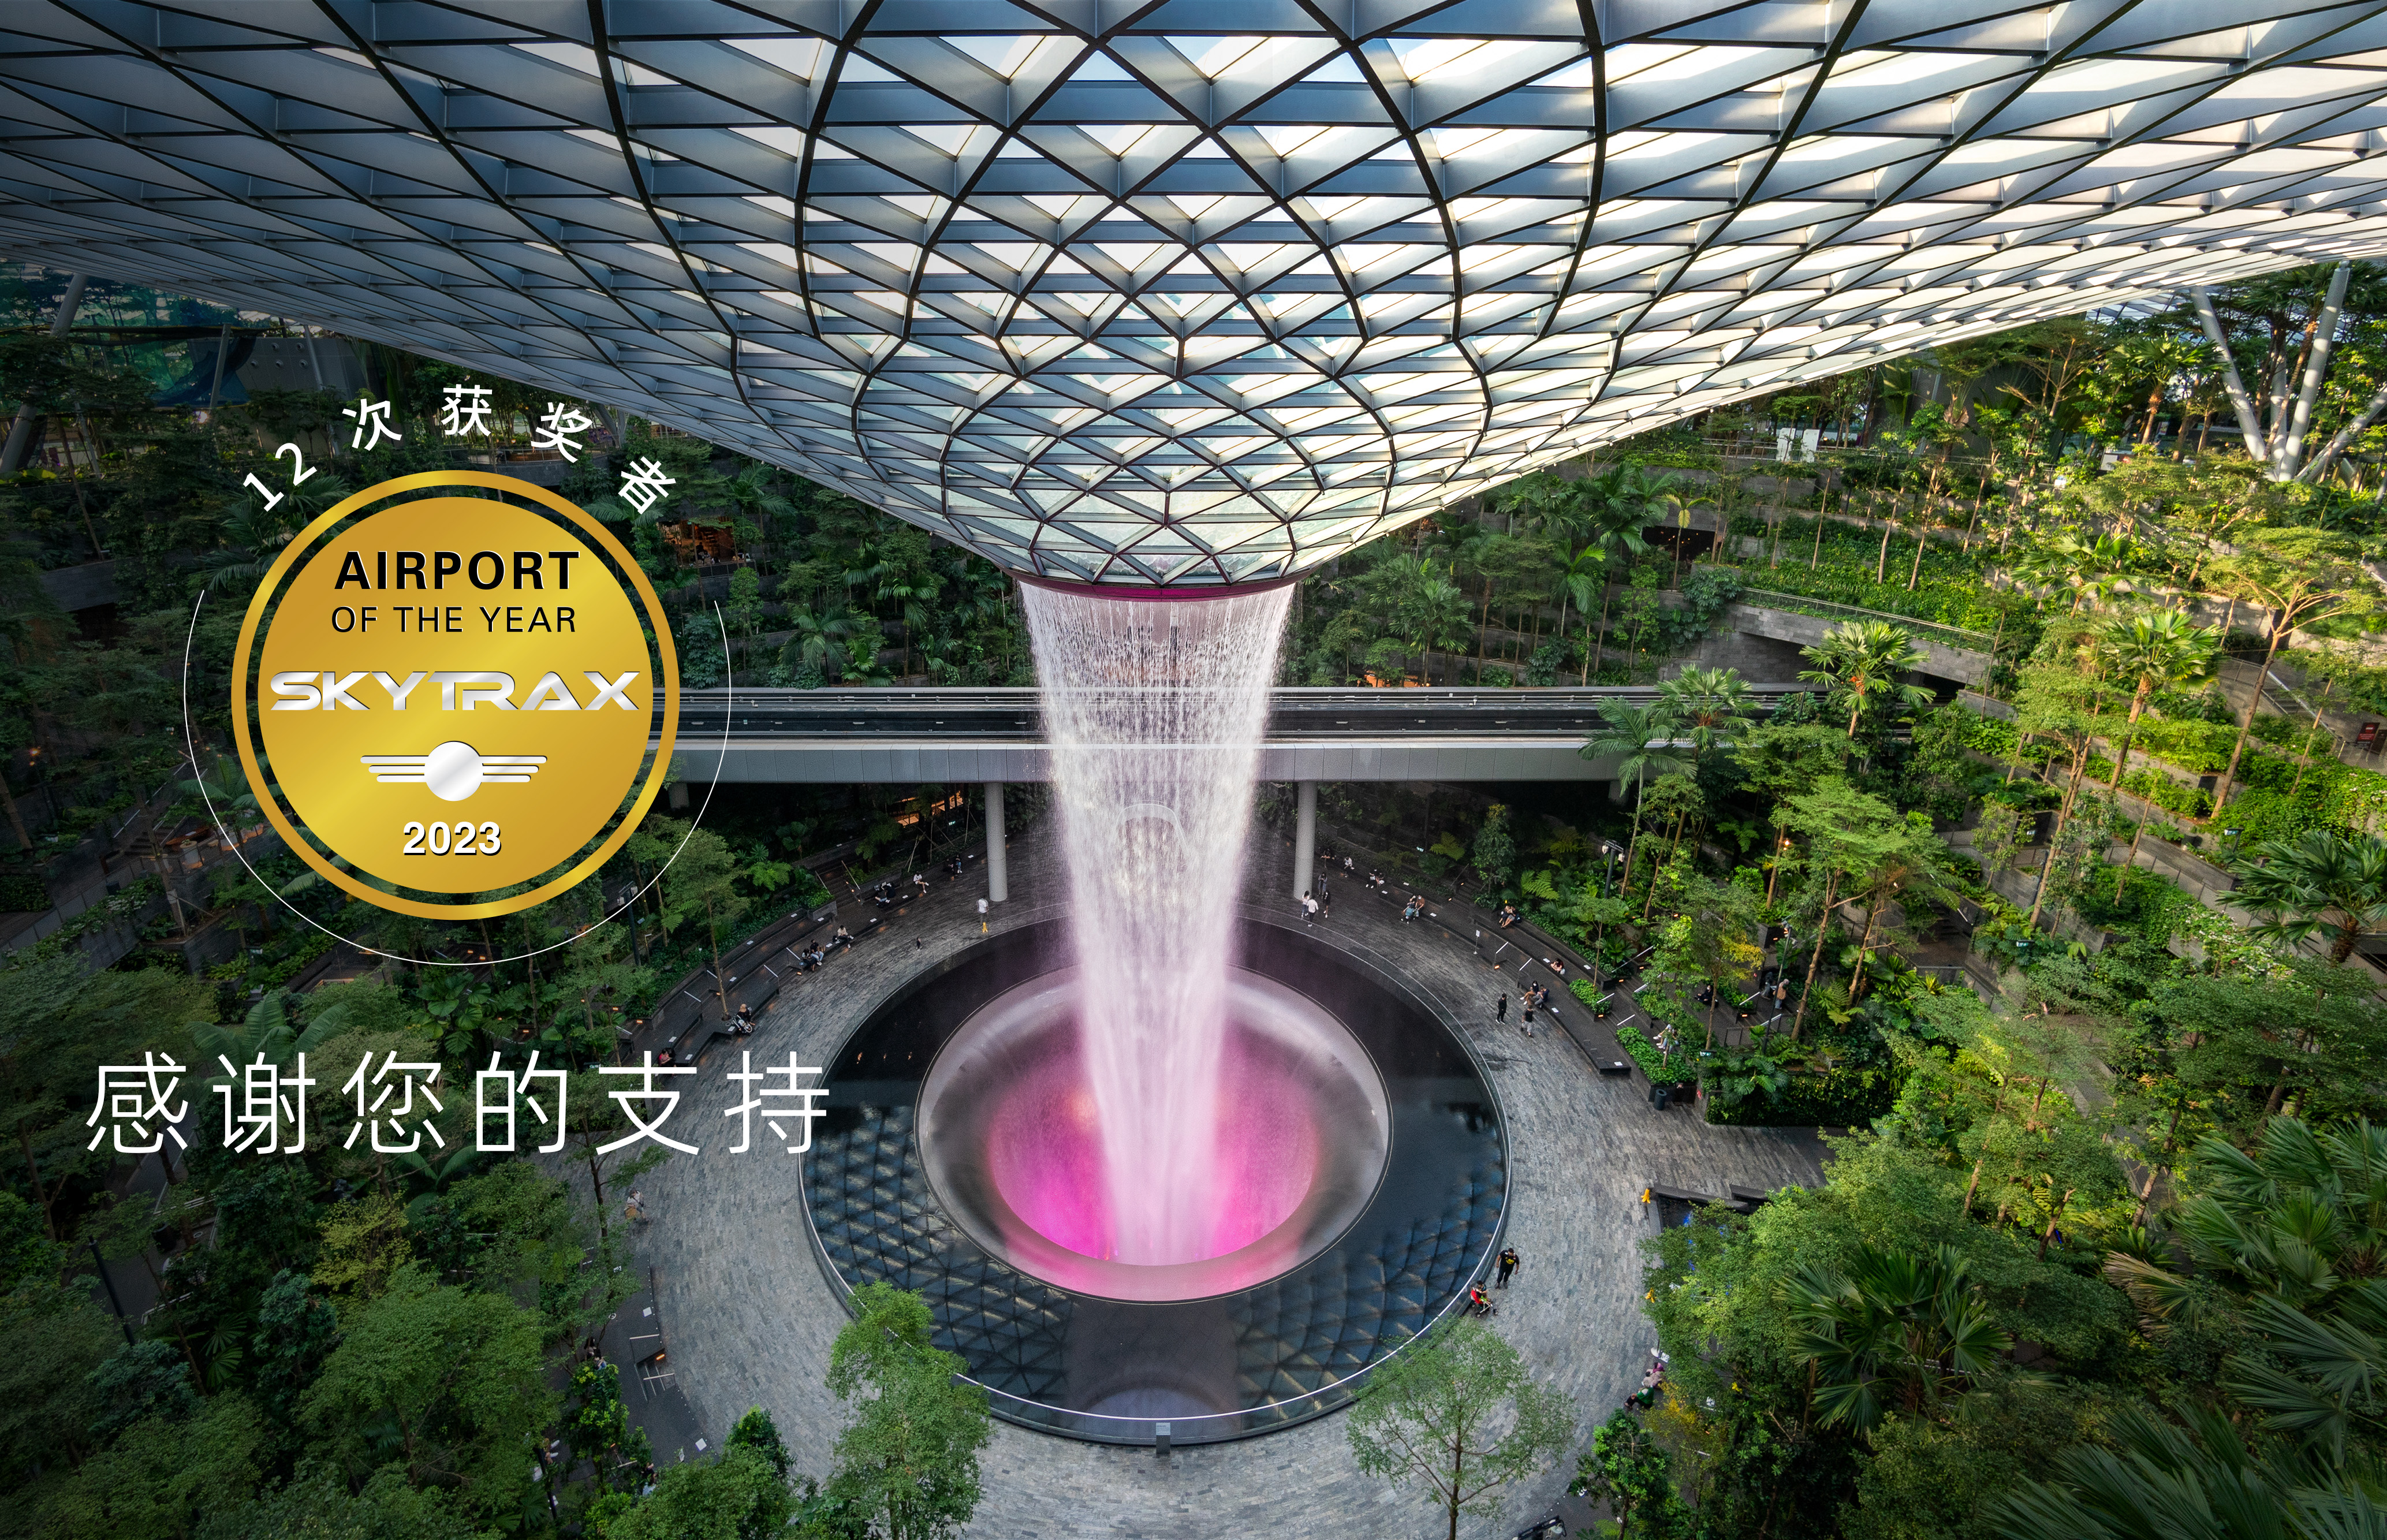 skytrax best airport in the world